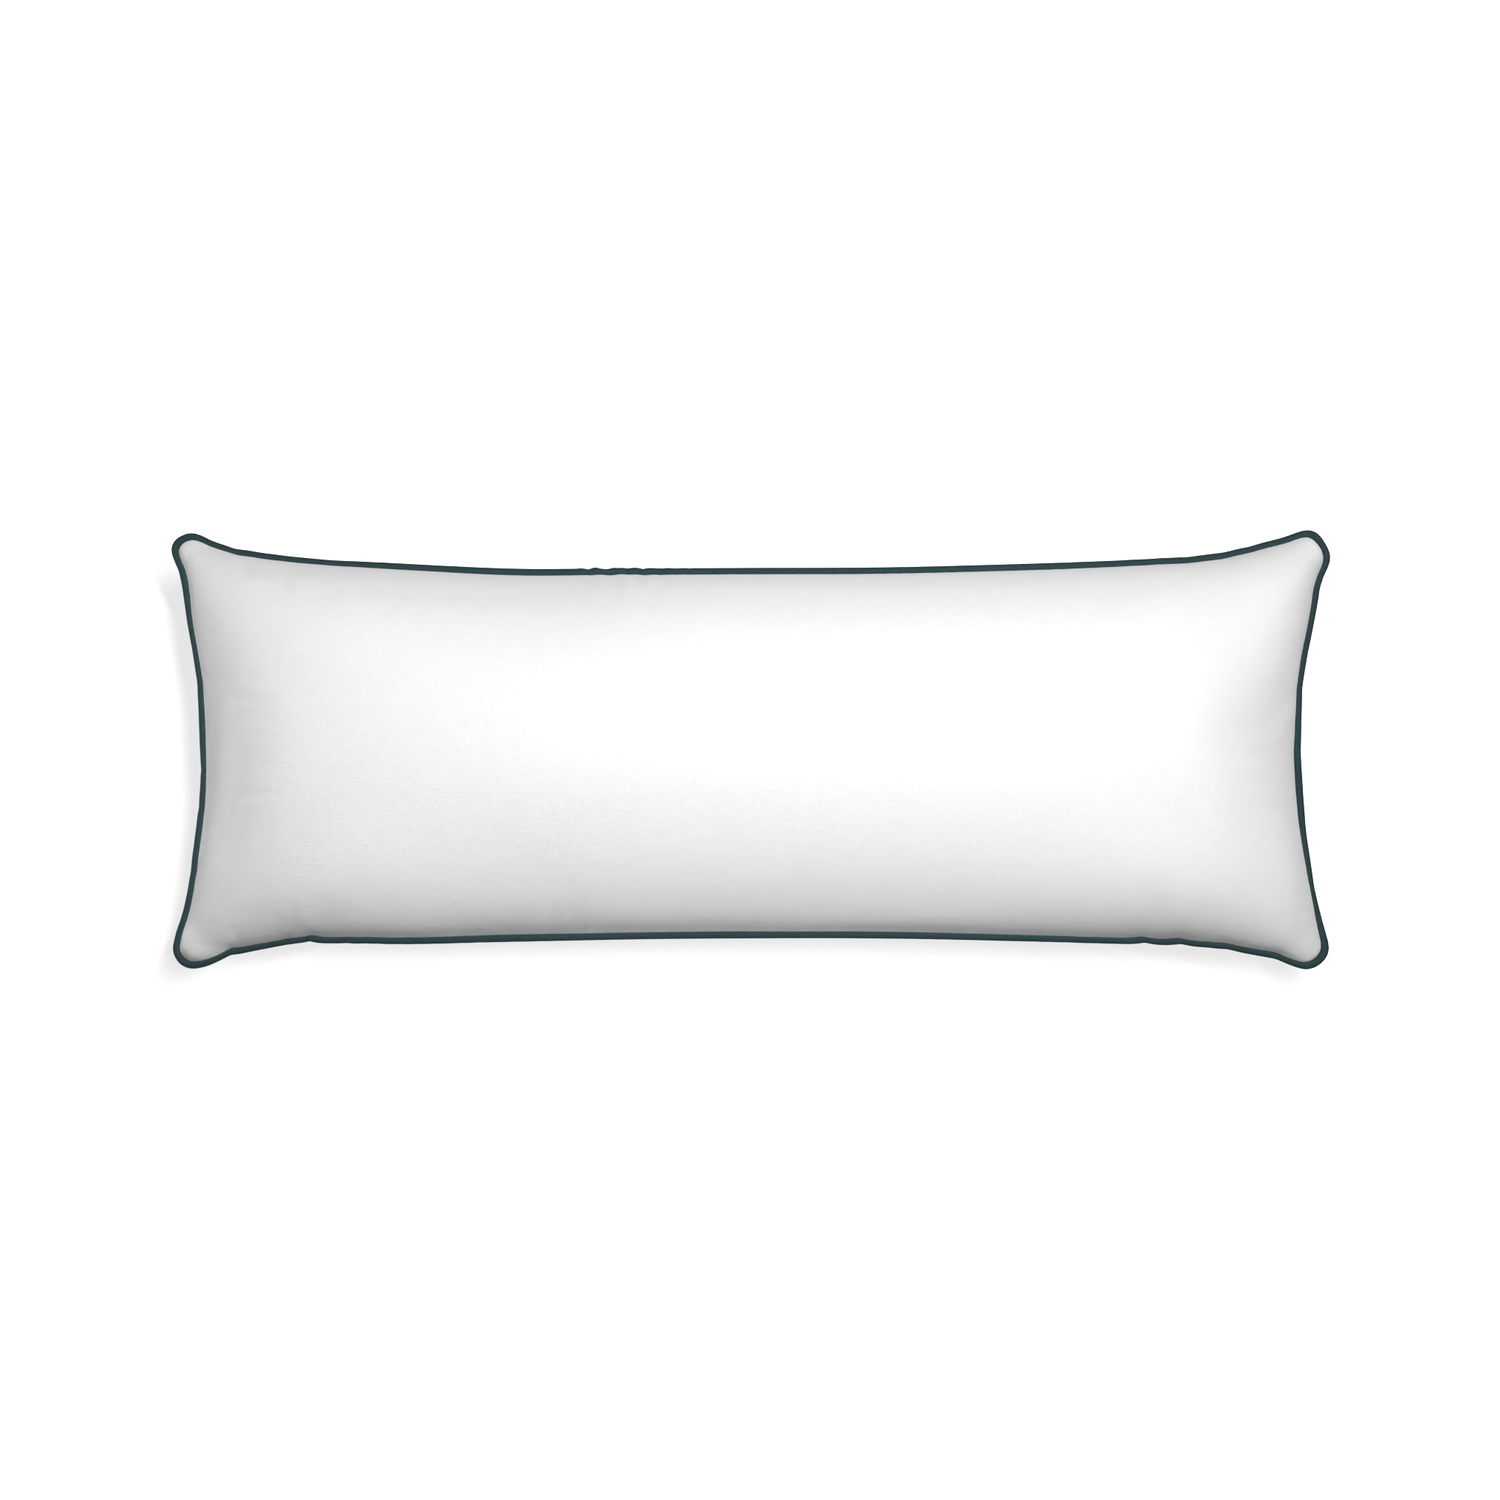 Xl-lumbar snow custom white cottonpillow with p piping on white background